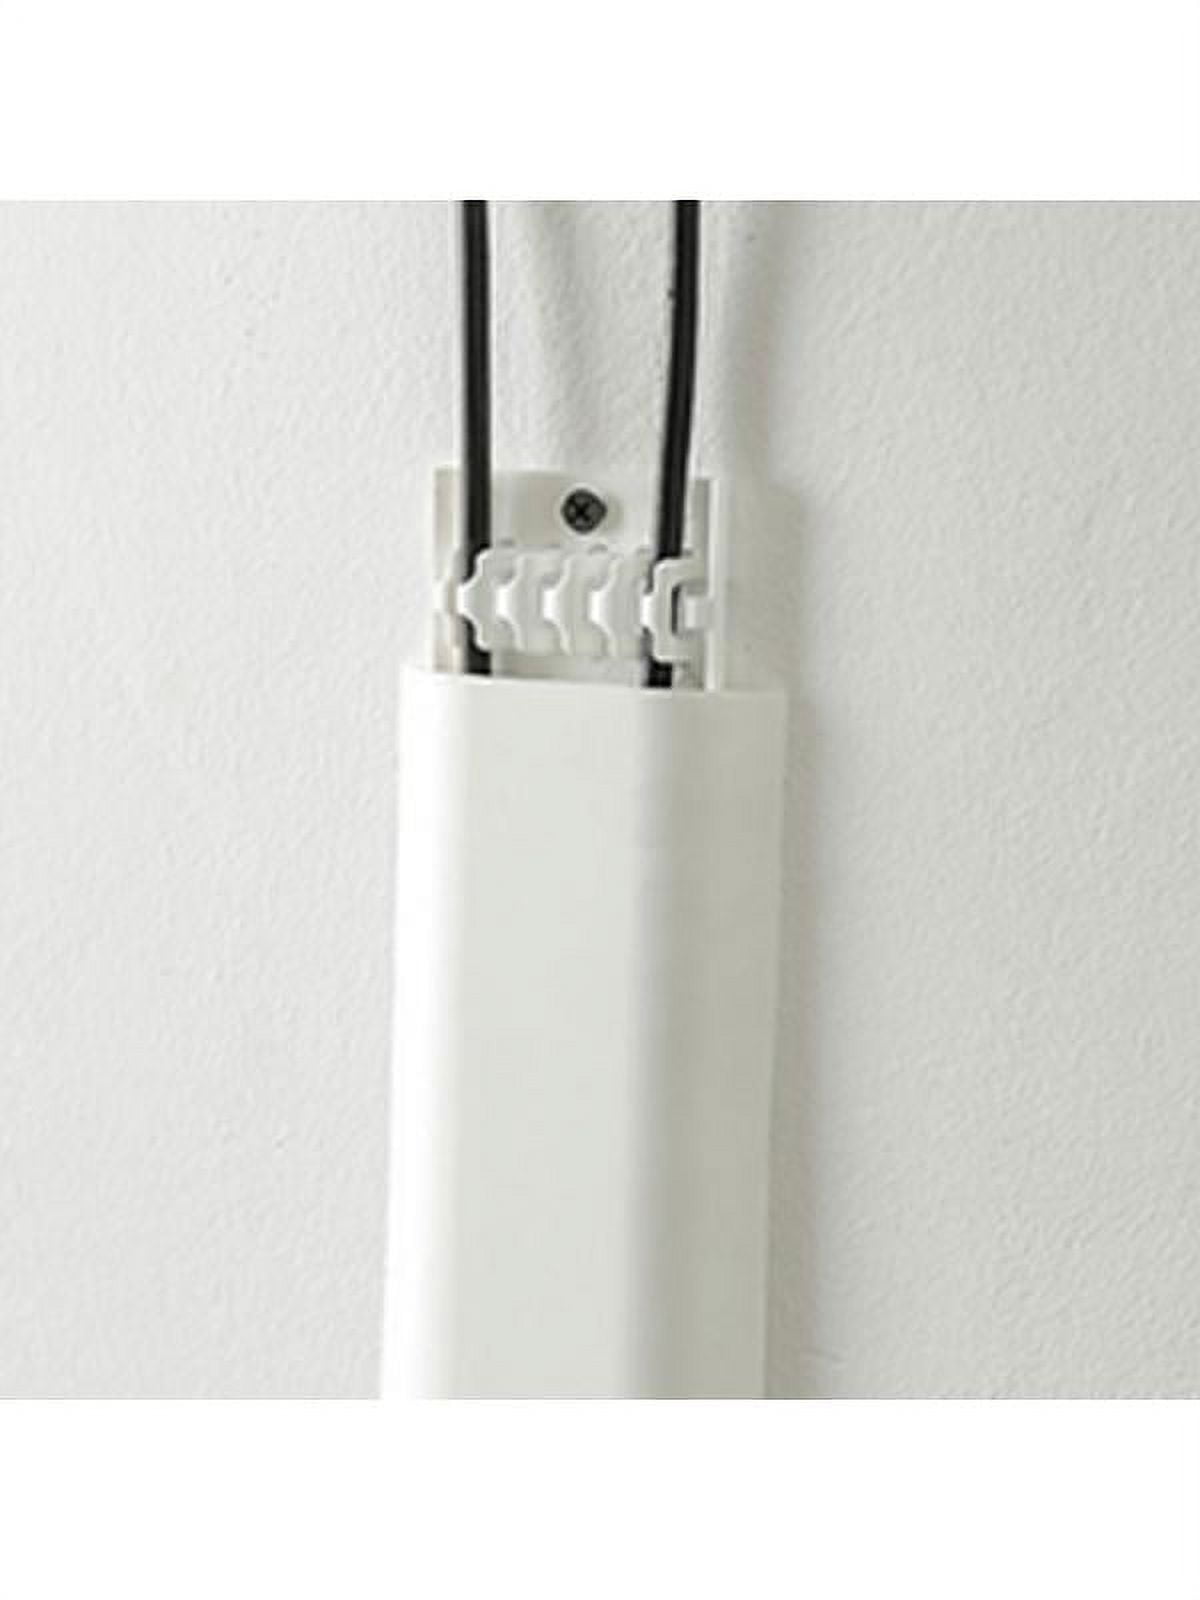 Wire Covers for 2 Cords, 68in Wire Hider On Wall Mounted, White Cord Cover  Kit, Cable